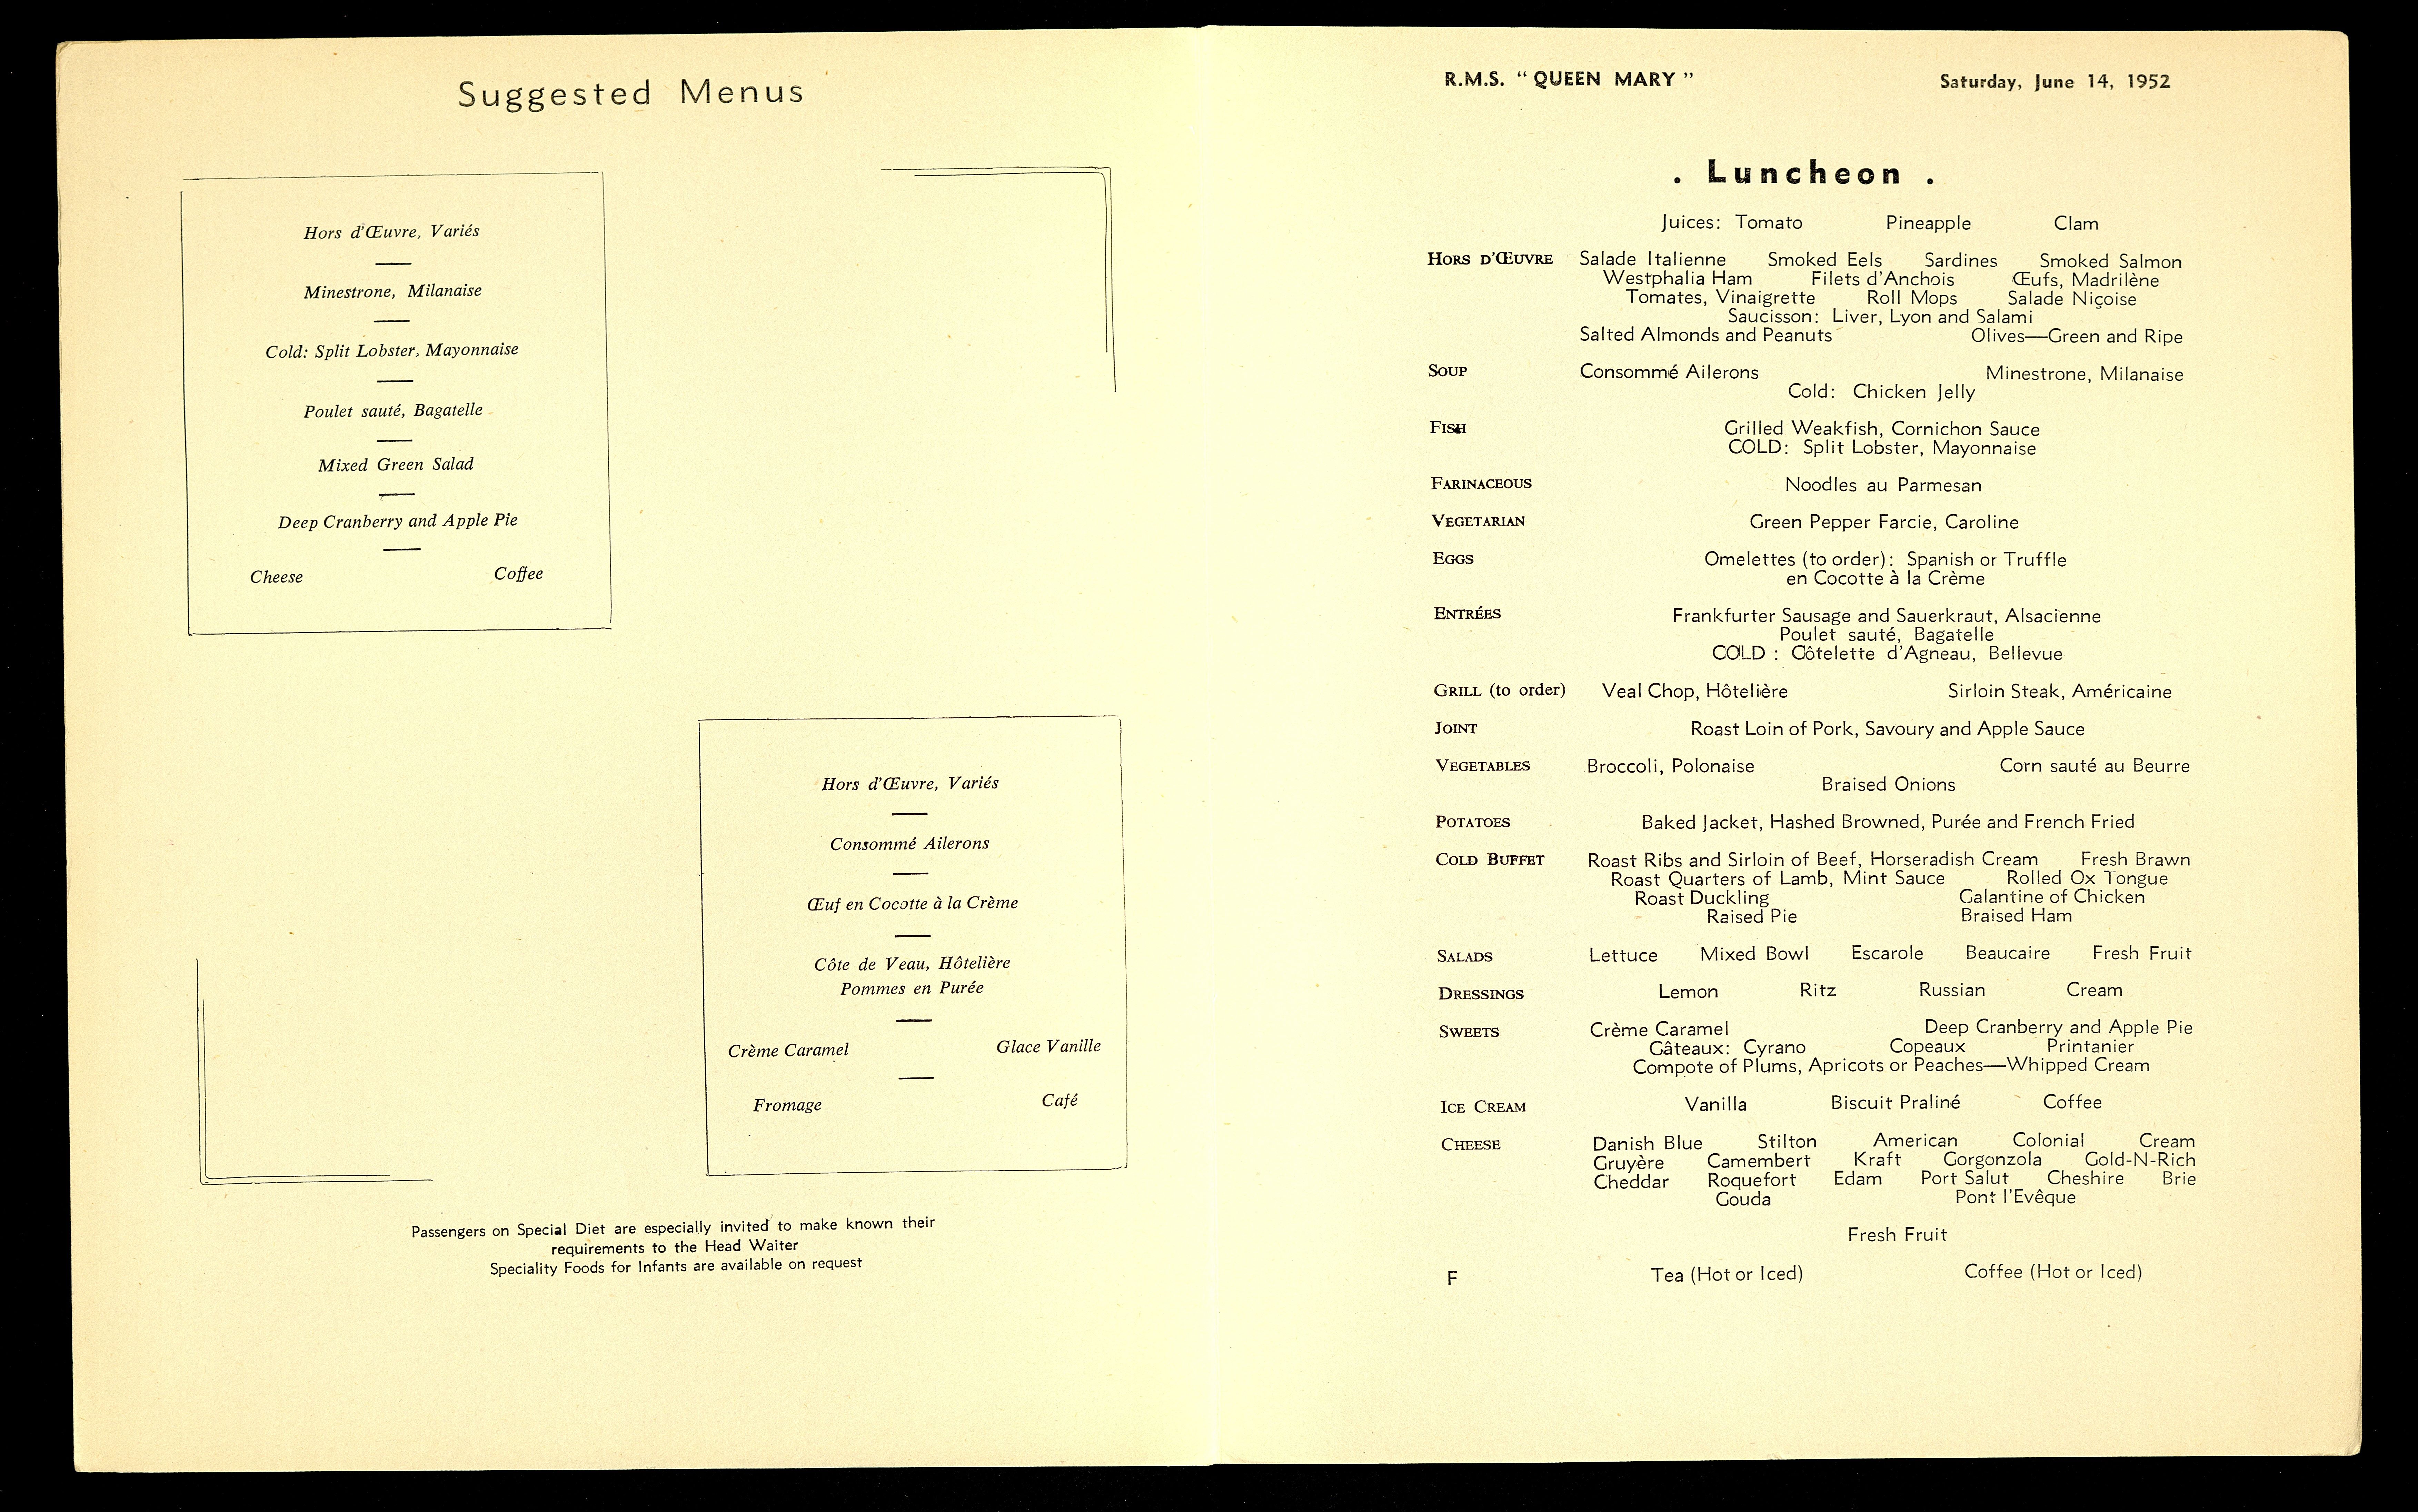 Interior pagespread of ship's menu, with offering such as minestrone, split lobster, poulet saute, mixed green salad, and deep cranberry and apple pie. 